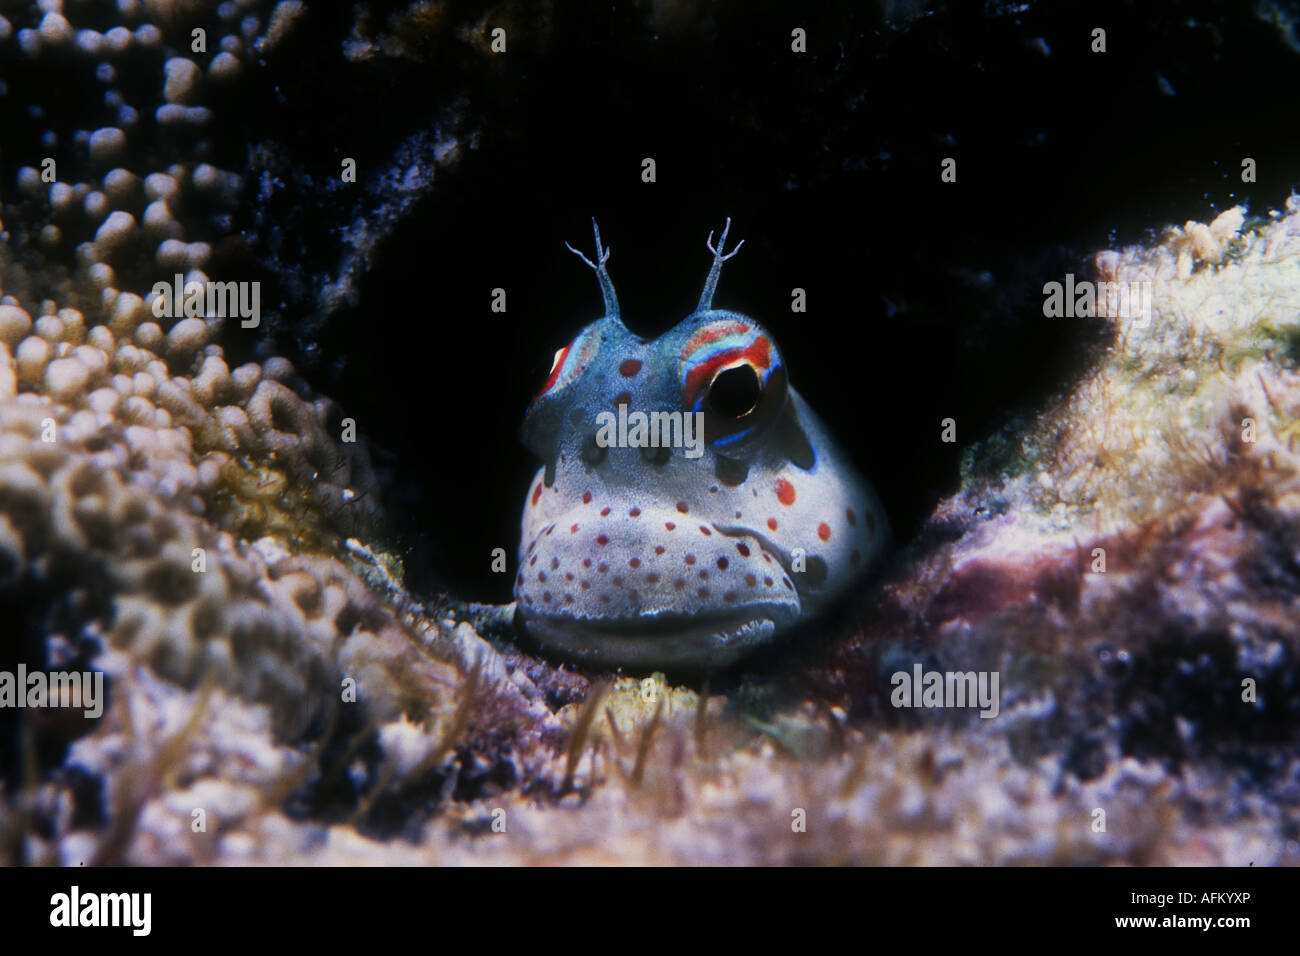 A Red spotted blenny, Blenniella chrysospilos, pokes its head out of a hole in the reef in Palau. Stock Photo